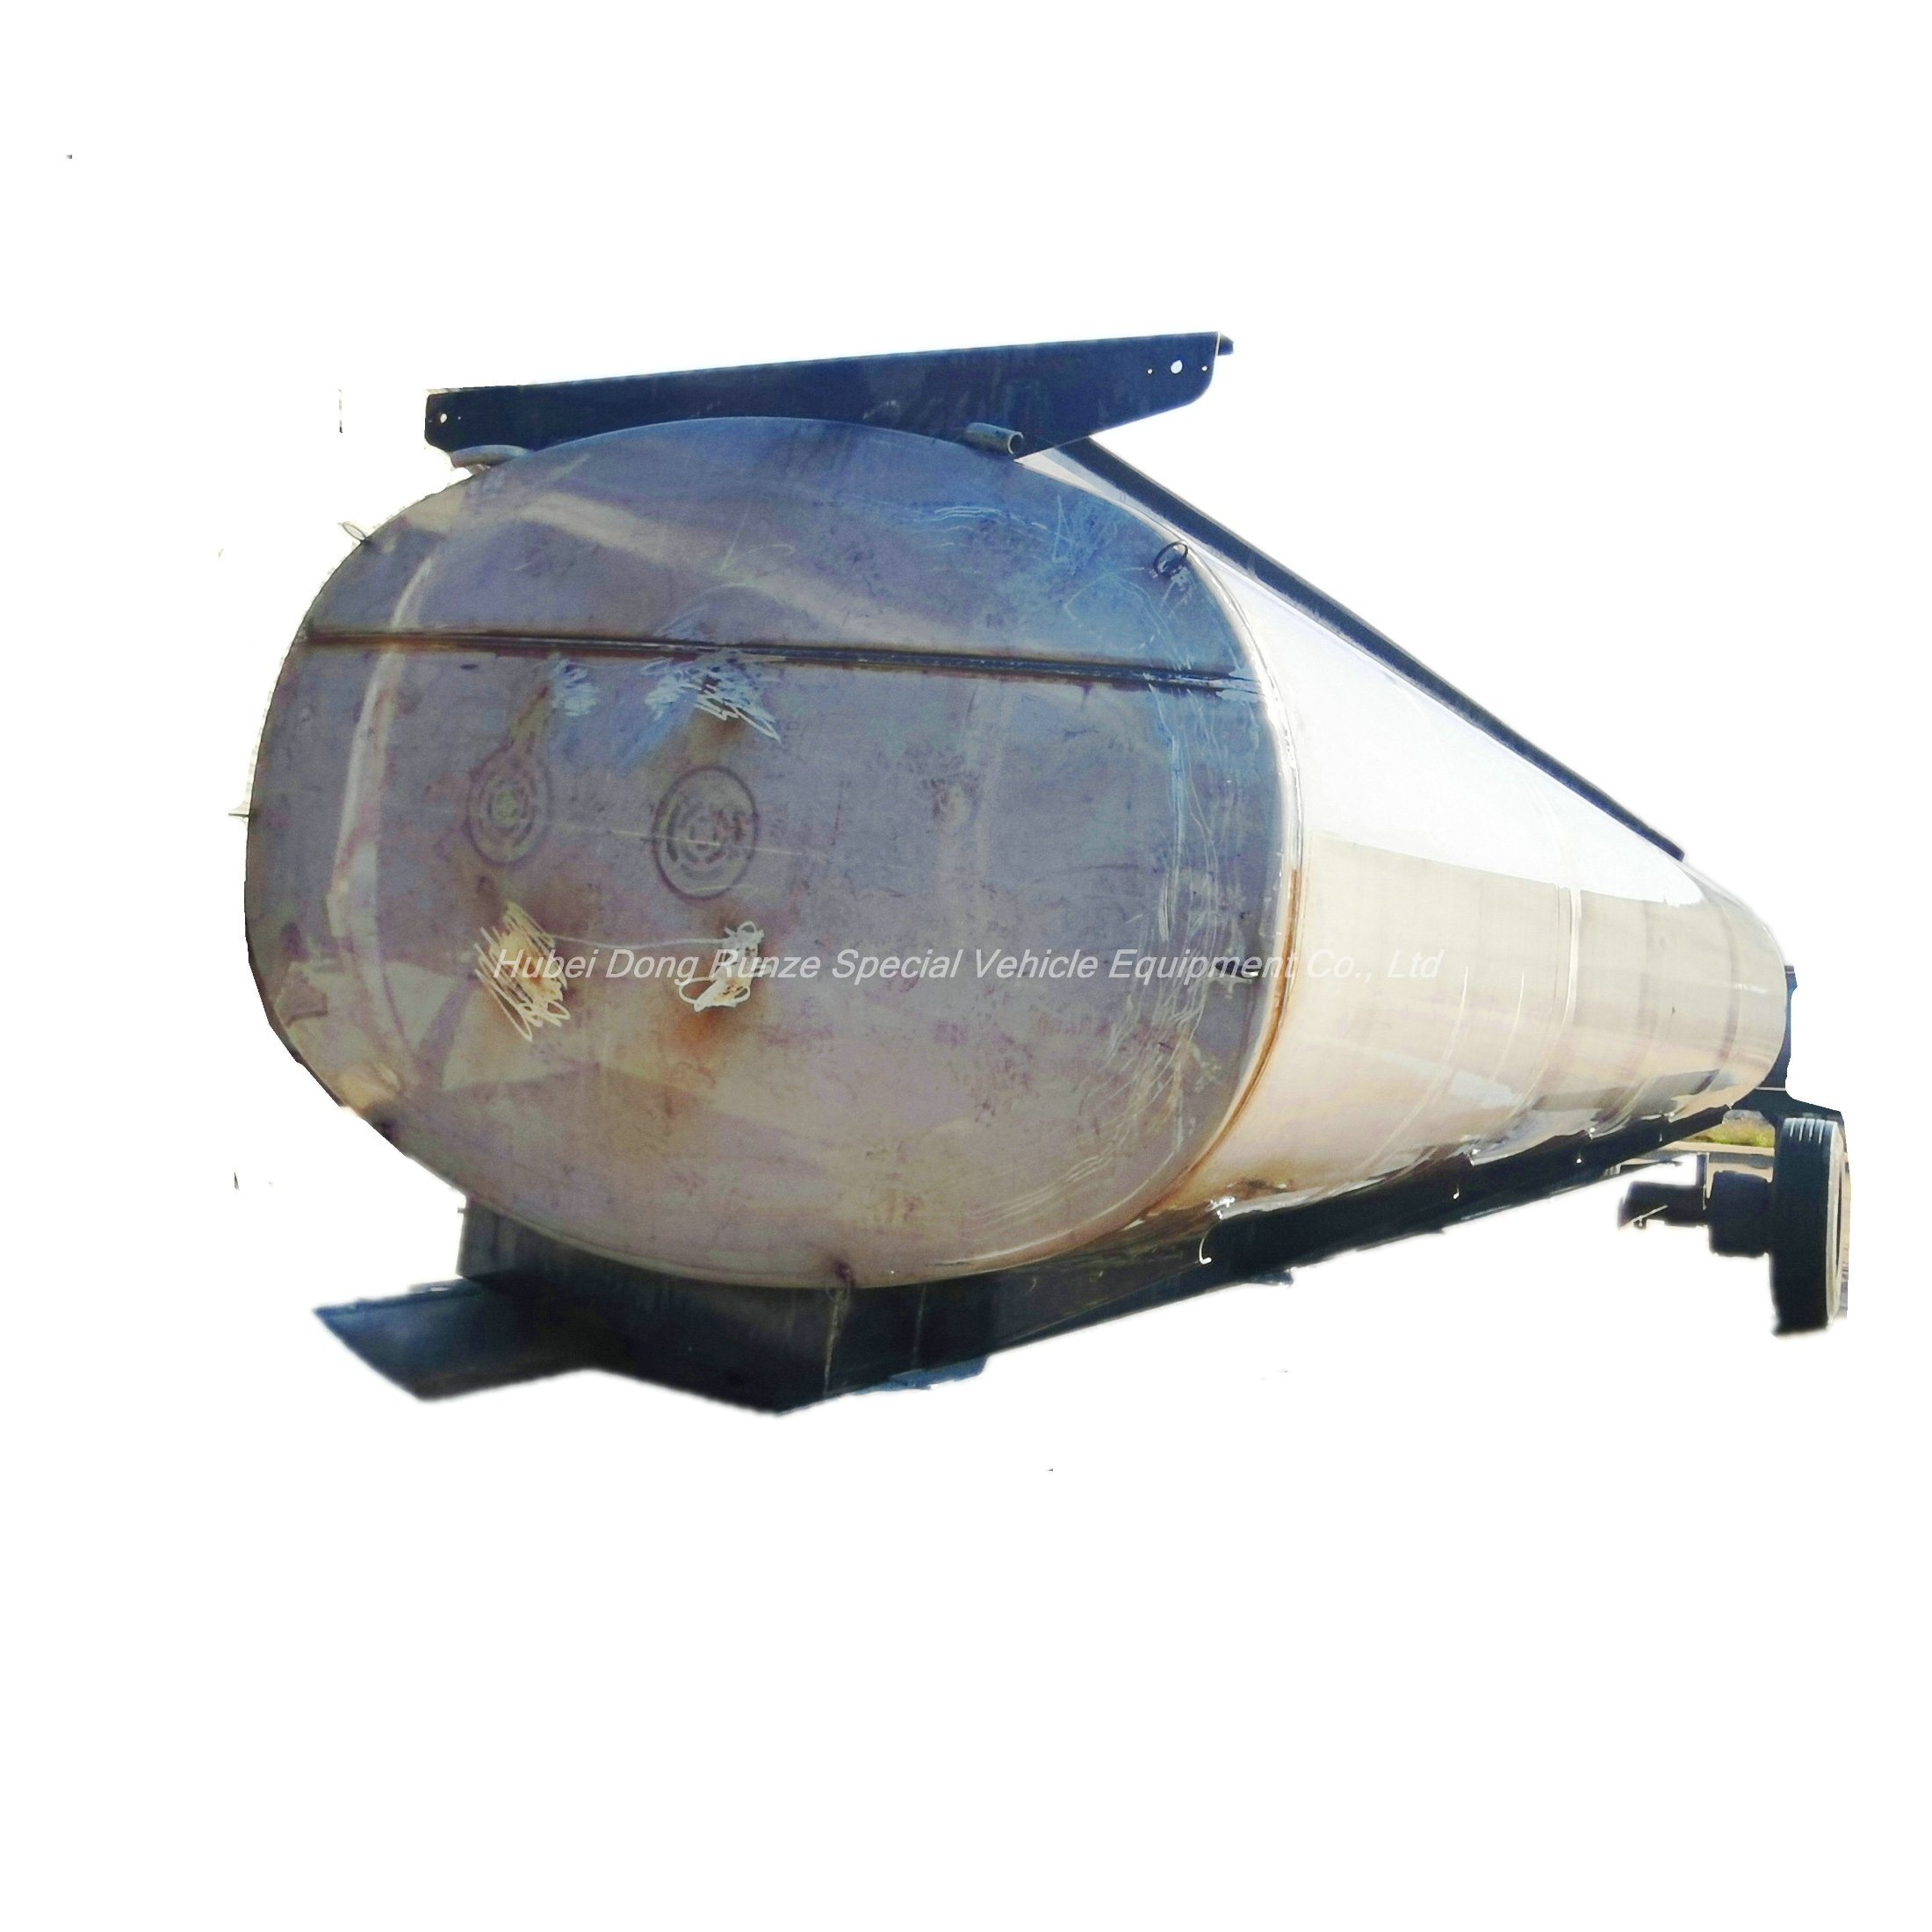 Customized SKD 16 M3-20 M3 Stainless Steel Tank Body for Lorry Truck Mounted Transport Oil, Water 